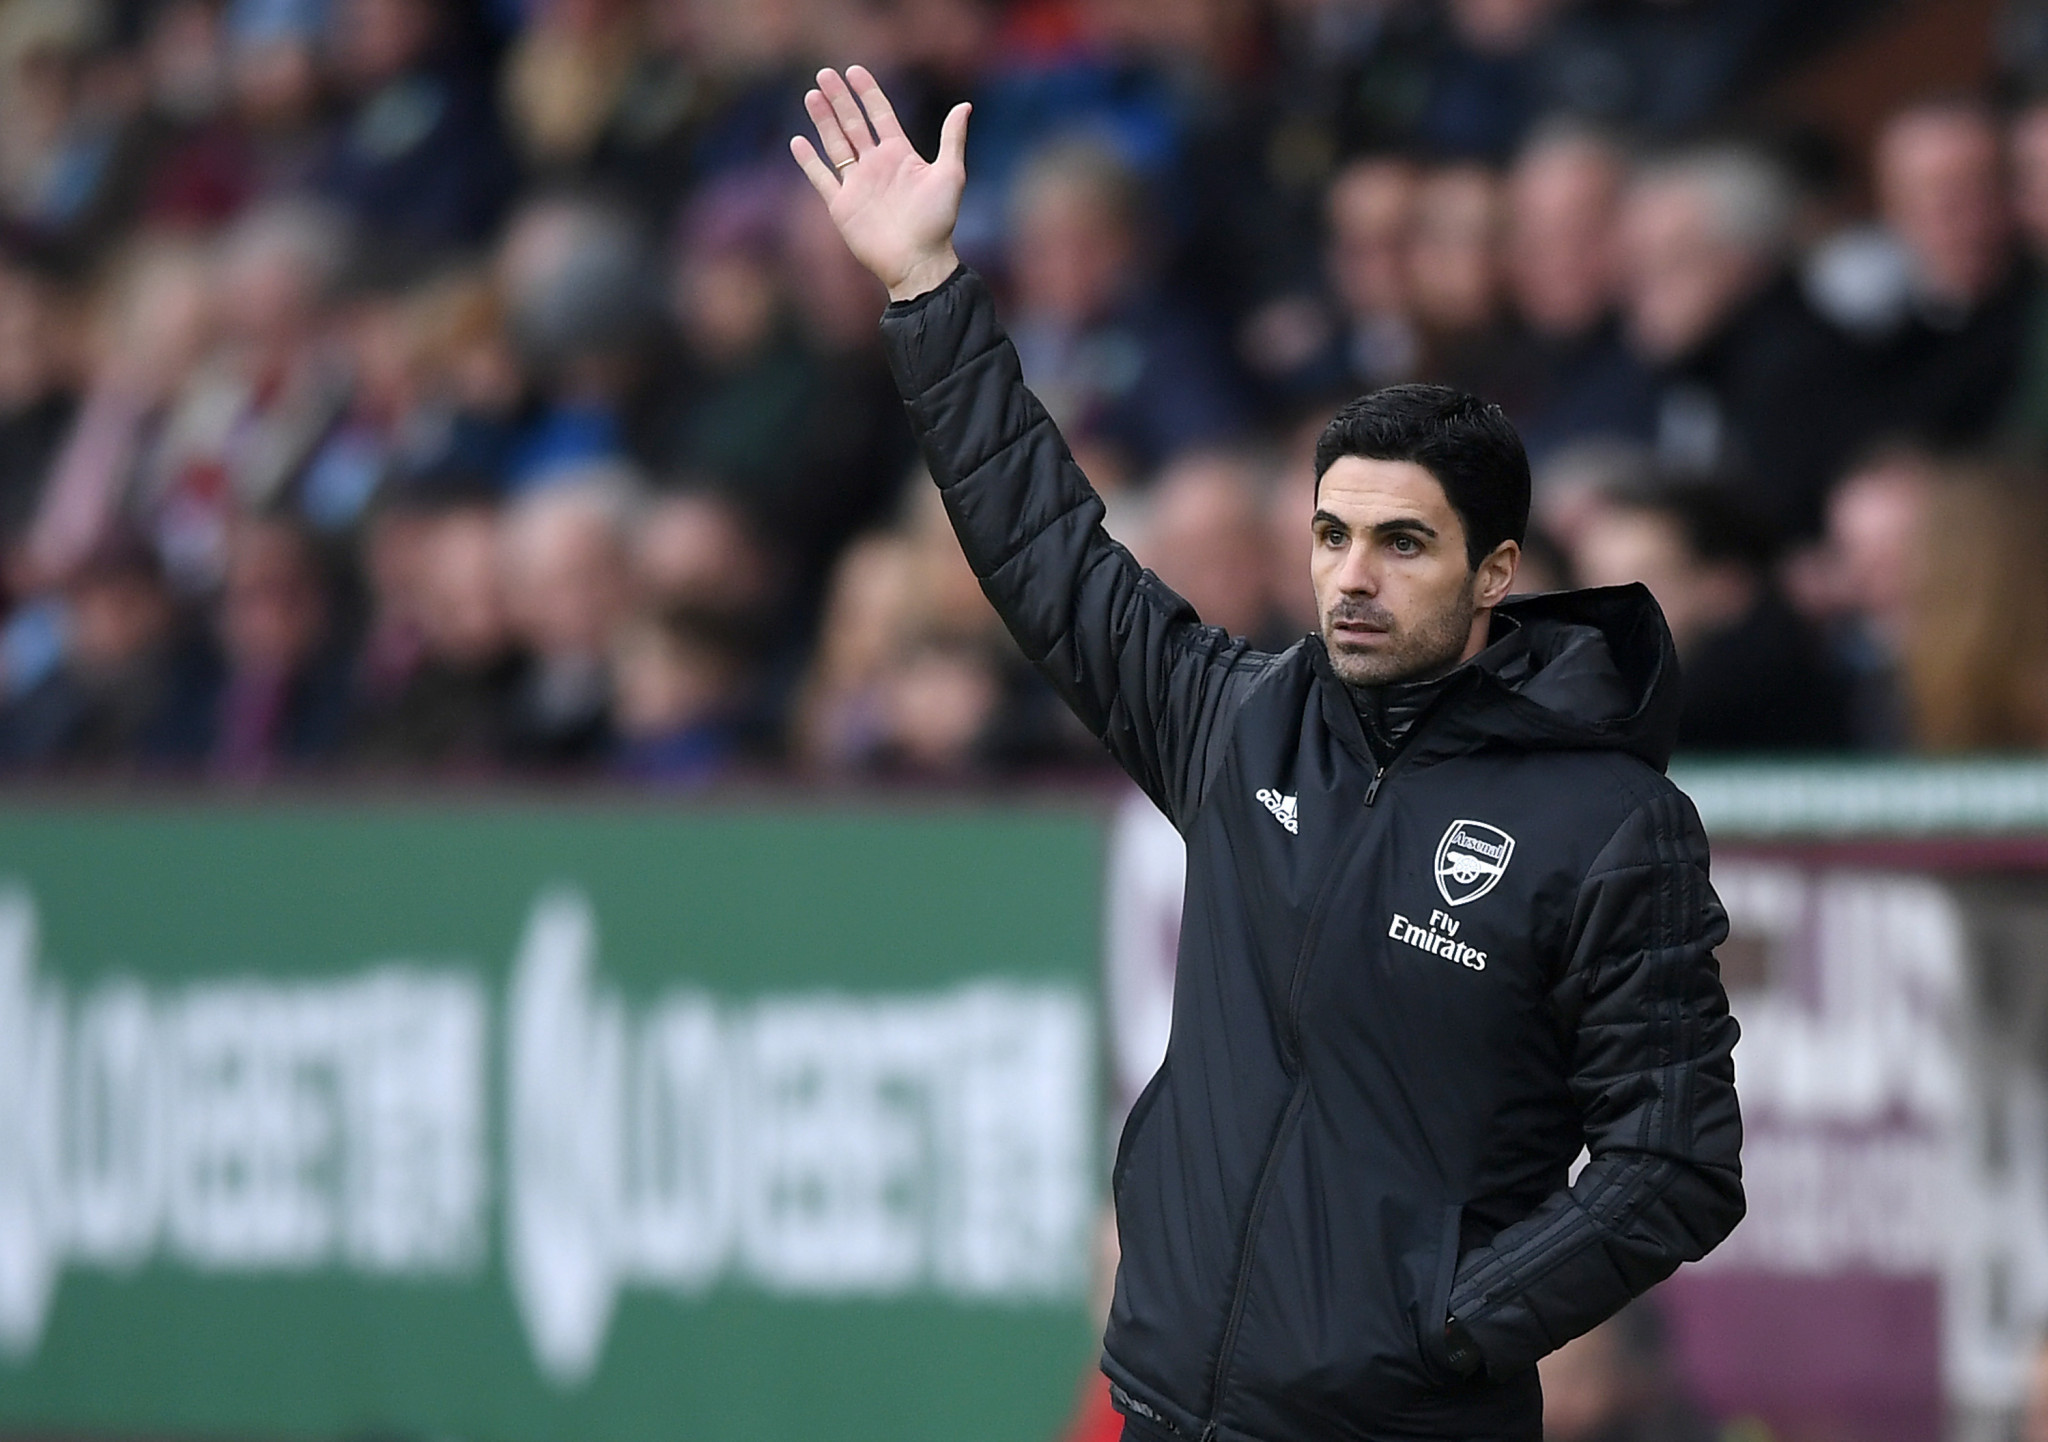 Arsenal manager Mikel Arteta is Spanish but never played for the national team - a fact that didn't prevent Everton and Arsenal being able to hire him during his playing career ©Getty Images